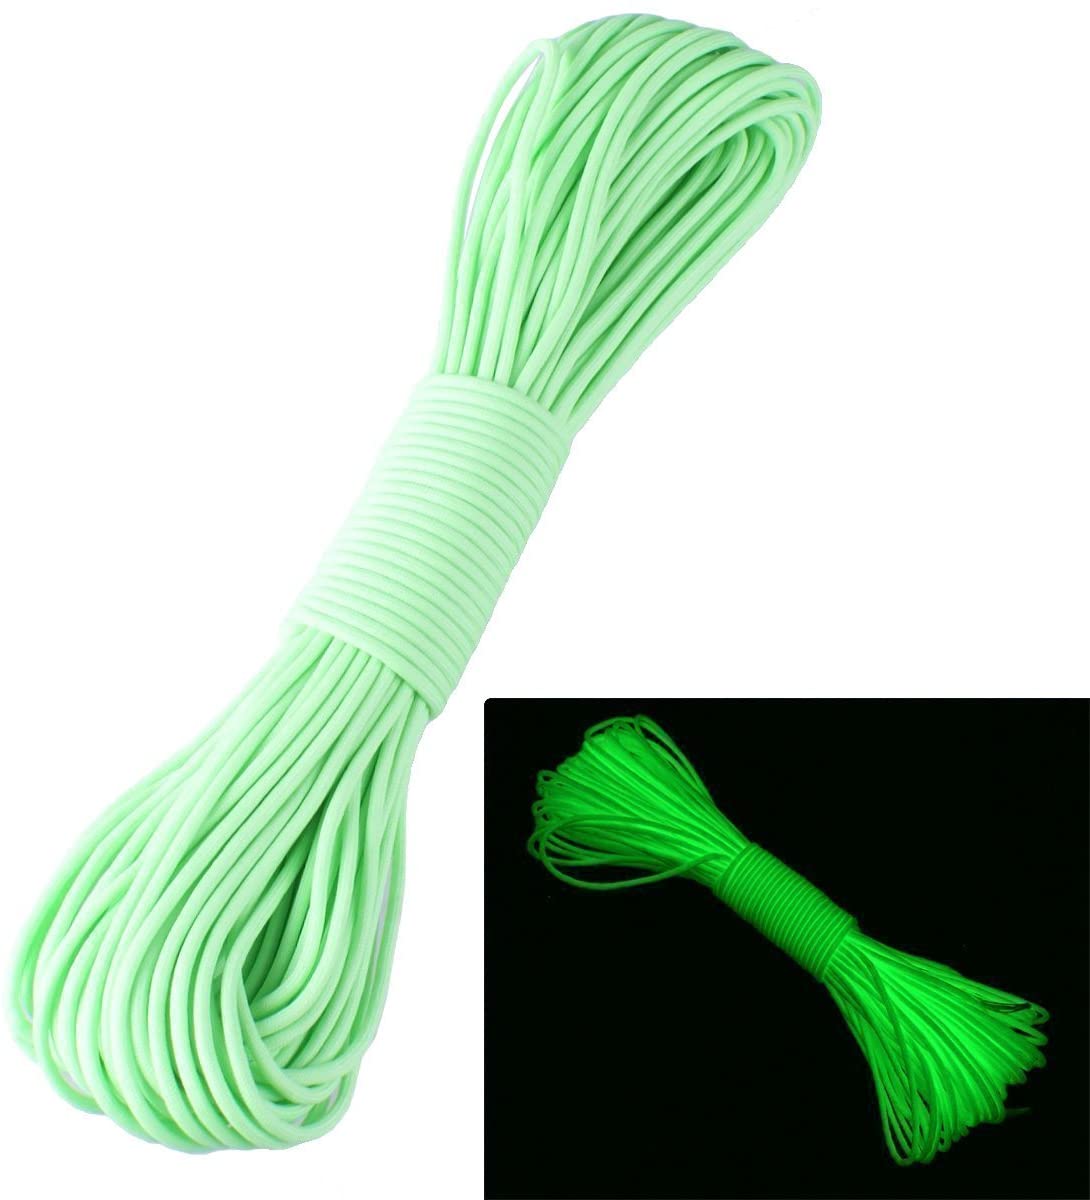 Glow in the dark paracord